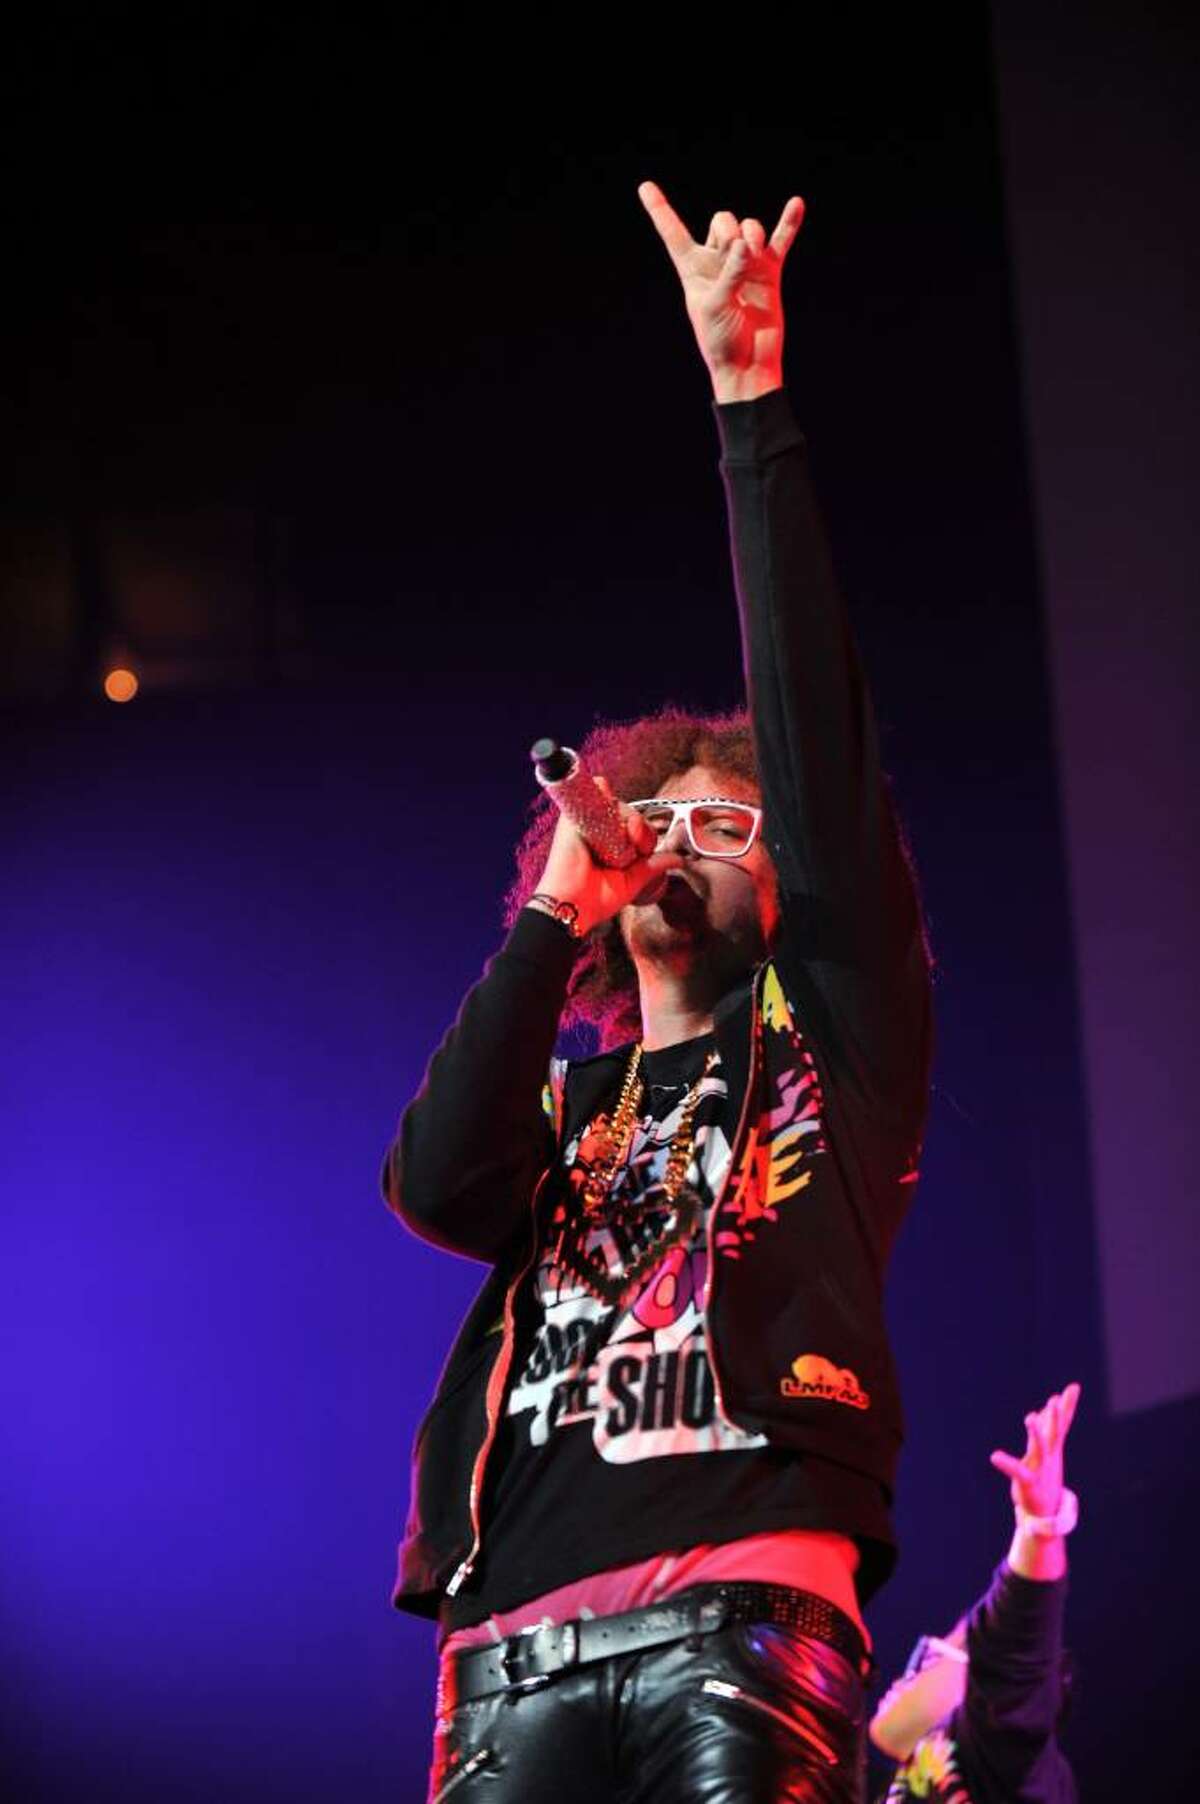 NEW YORK - FEBRUARY 24: Red Foo of LMFAO performs at Madison Square Garden on February 24, 2010 in New York City. (Photo by Bryan Bedder/Getty Images) *** Local Caption *** Red Foo